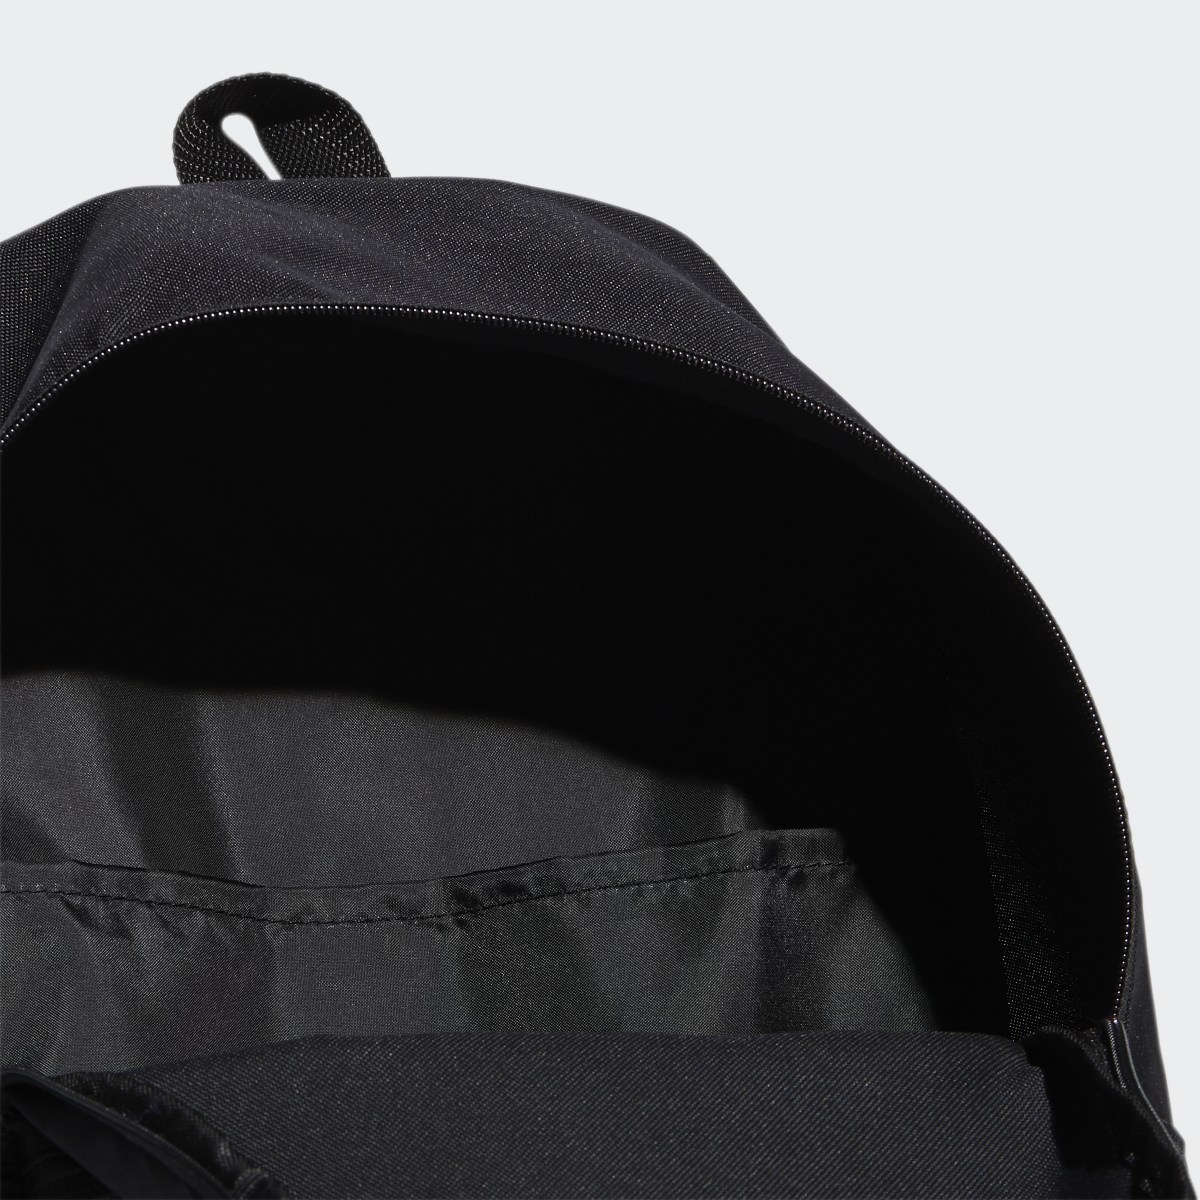 Adidas Linear Classic Daily Backpack. 5